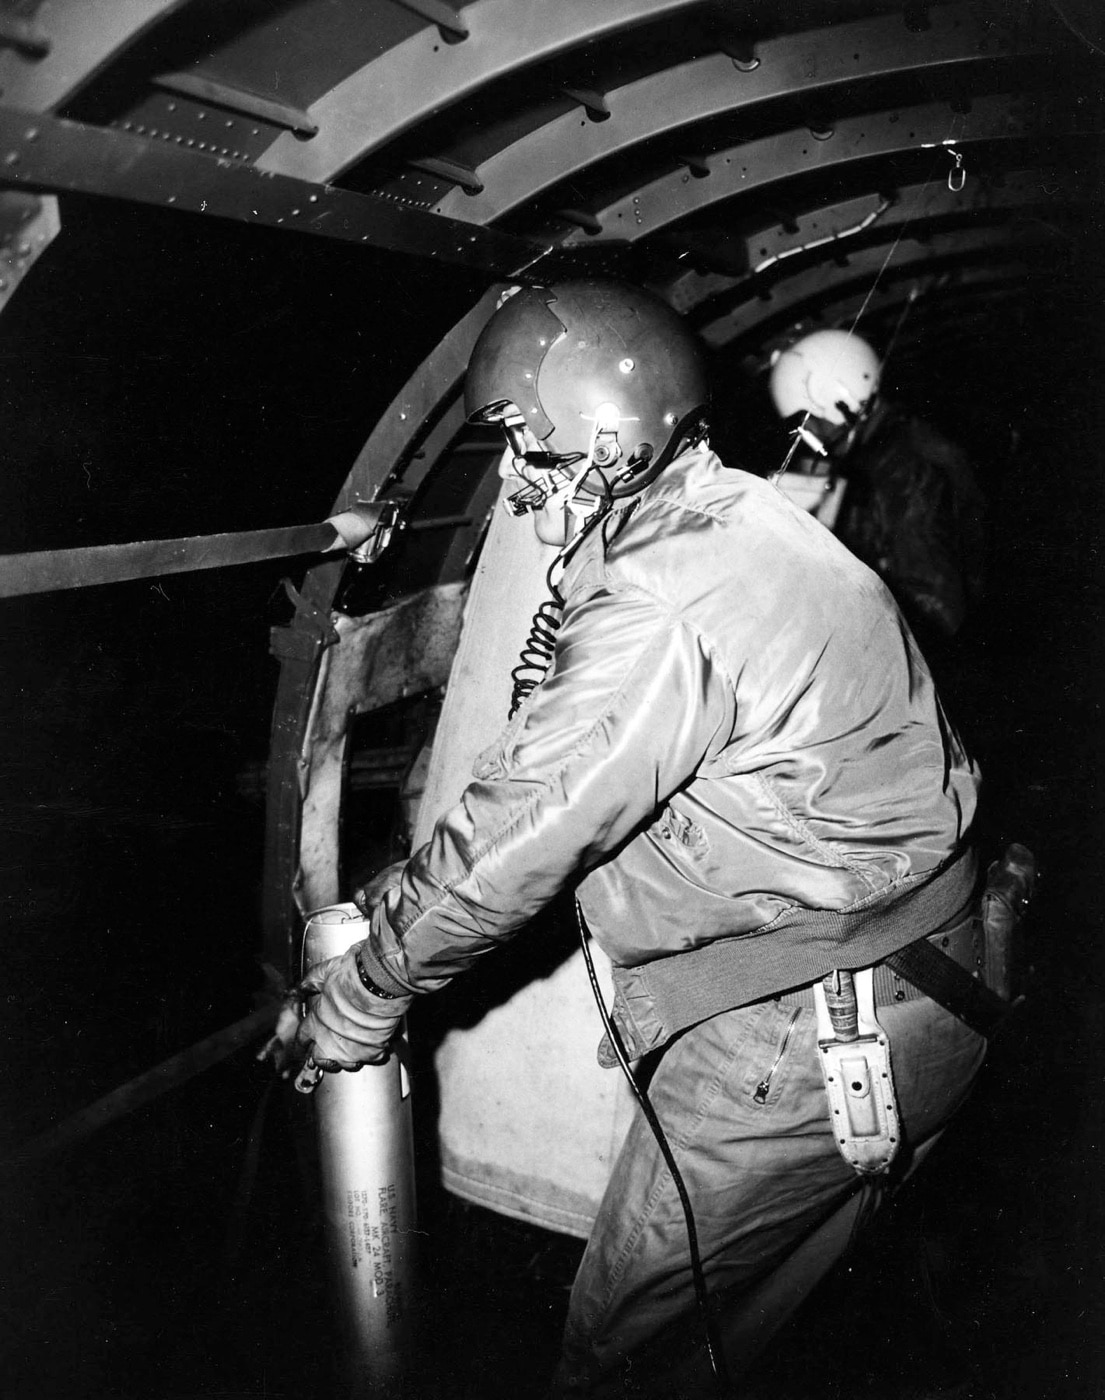 This photo is of an AC-47 gunner in the rear of the aircraft. He is preparing to drop a military illumination flare from an AC-47 aircraft. In the time before the widespread use of night vision equipment, adding light to the night was the only way Americans could see the enemy. A flare, also sometimes called a fusée, fusee, or bengala, bengalo in several European countries, is a type of pyrotechnic that produces a bright light or intense heat without an explosion.